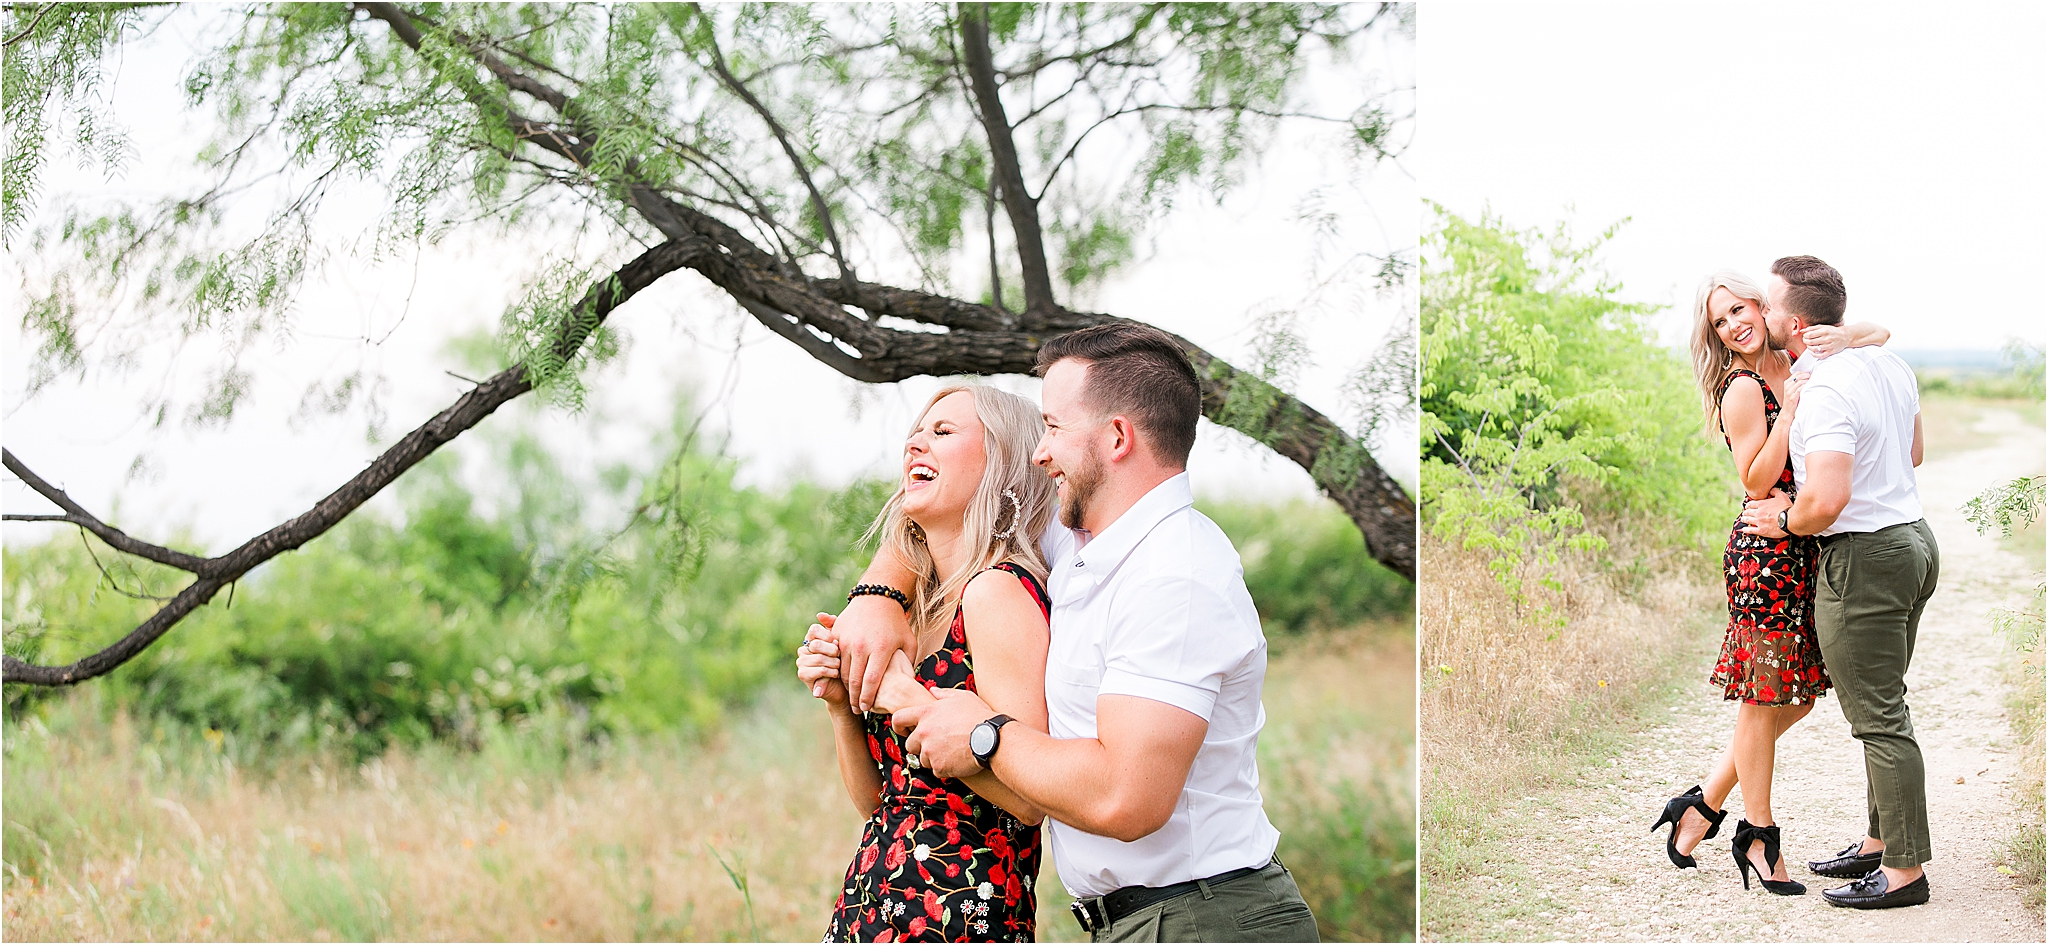 A couple busts out in laughter while hugging under a tree at Tandy Hills Nature Preserve in Fort Worth, Texas 